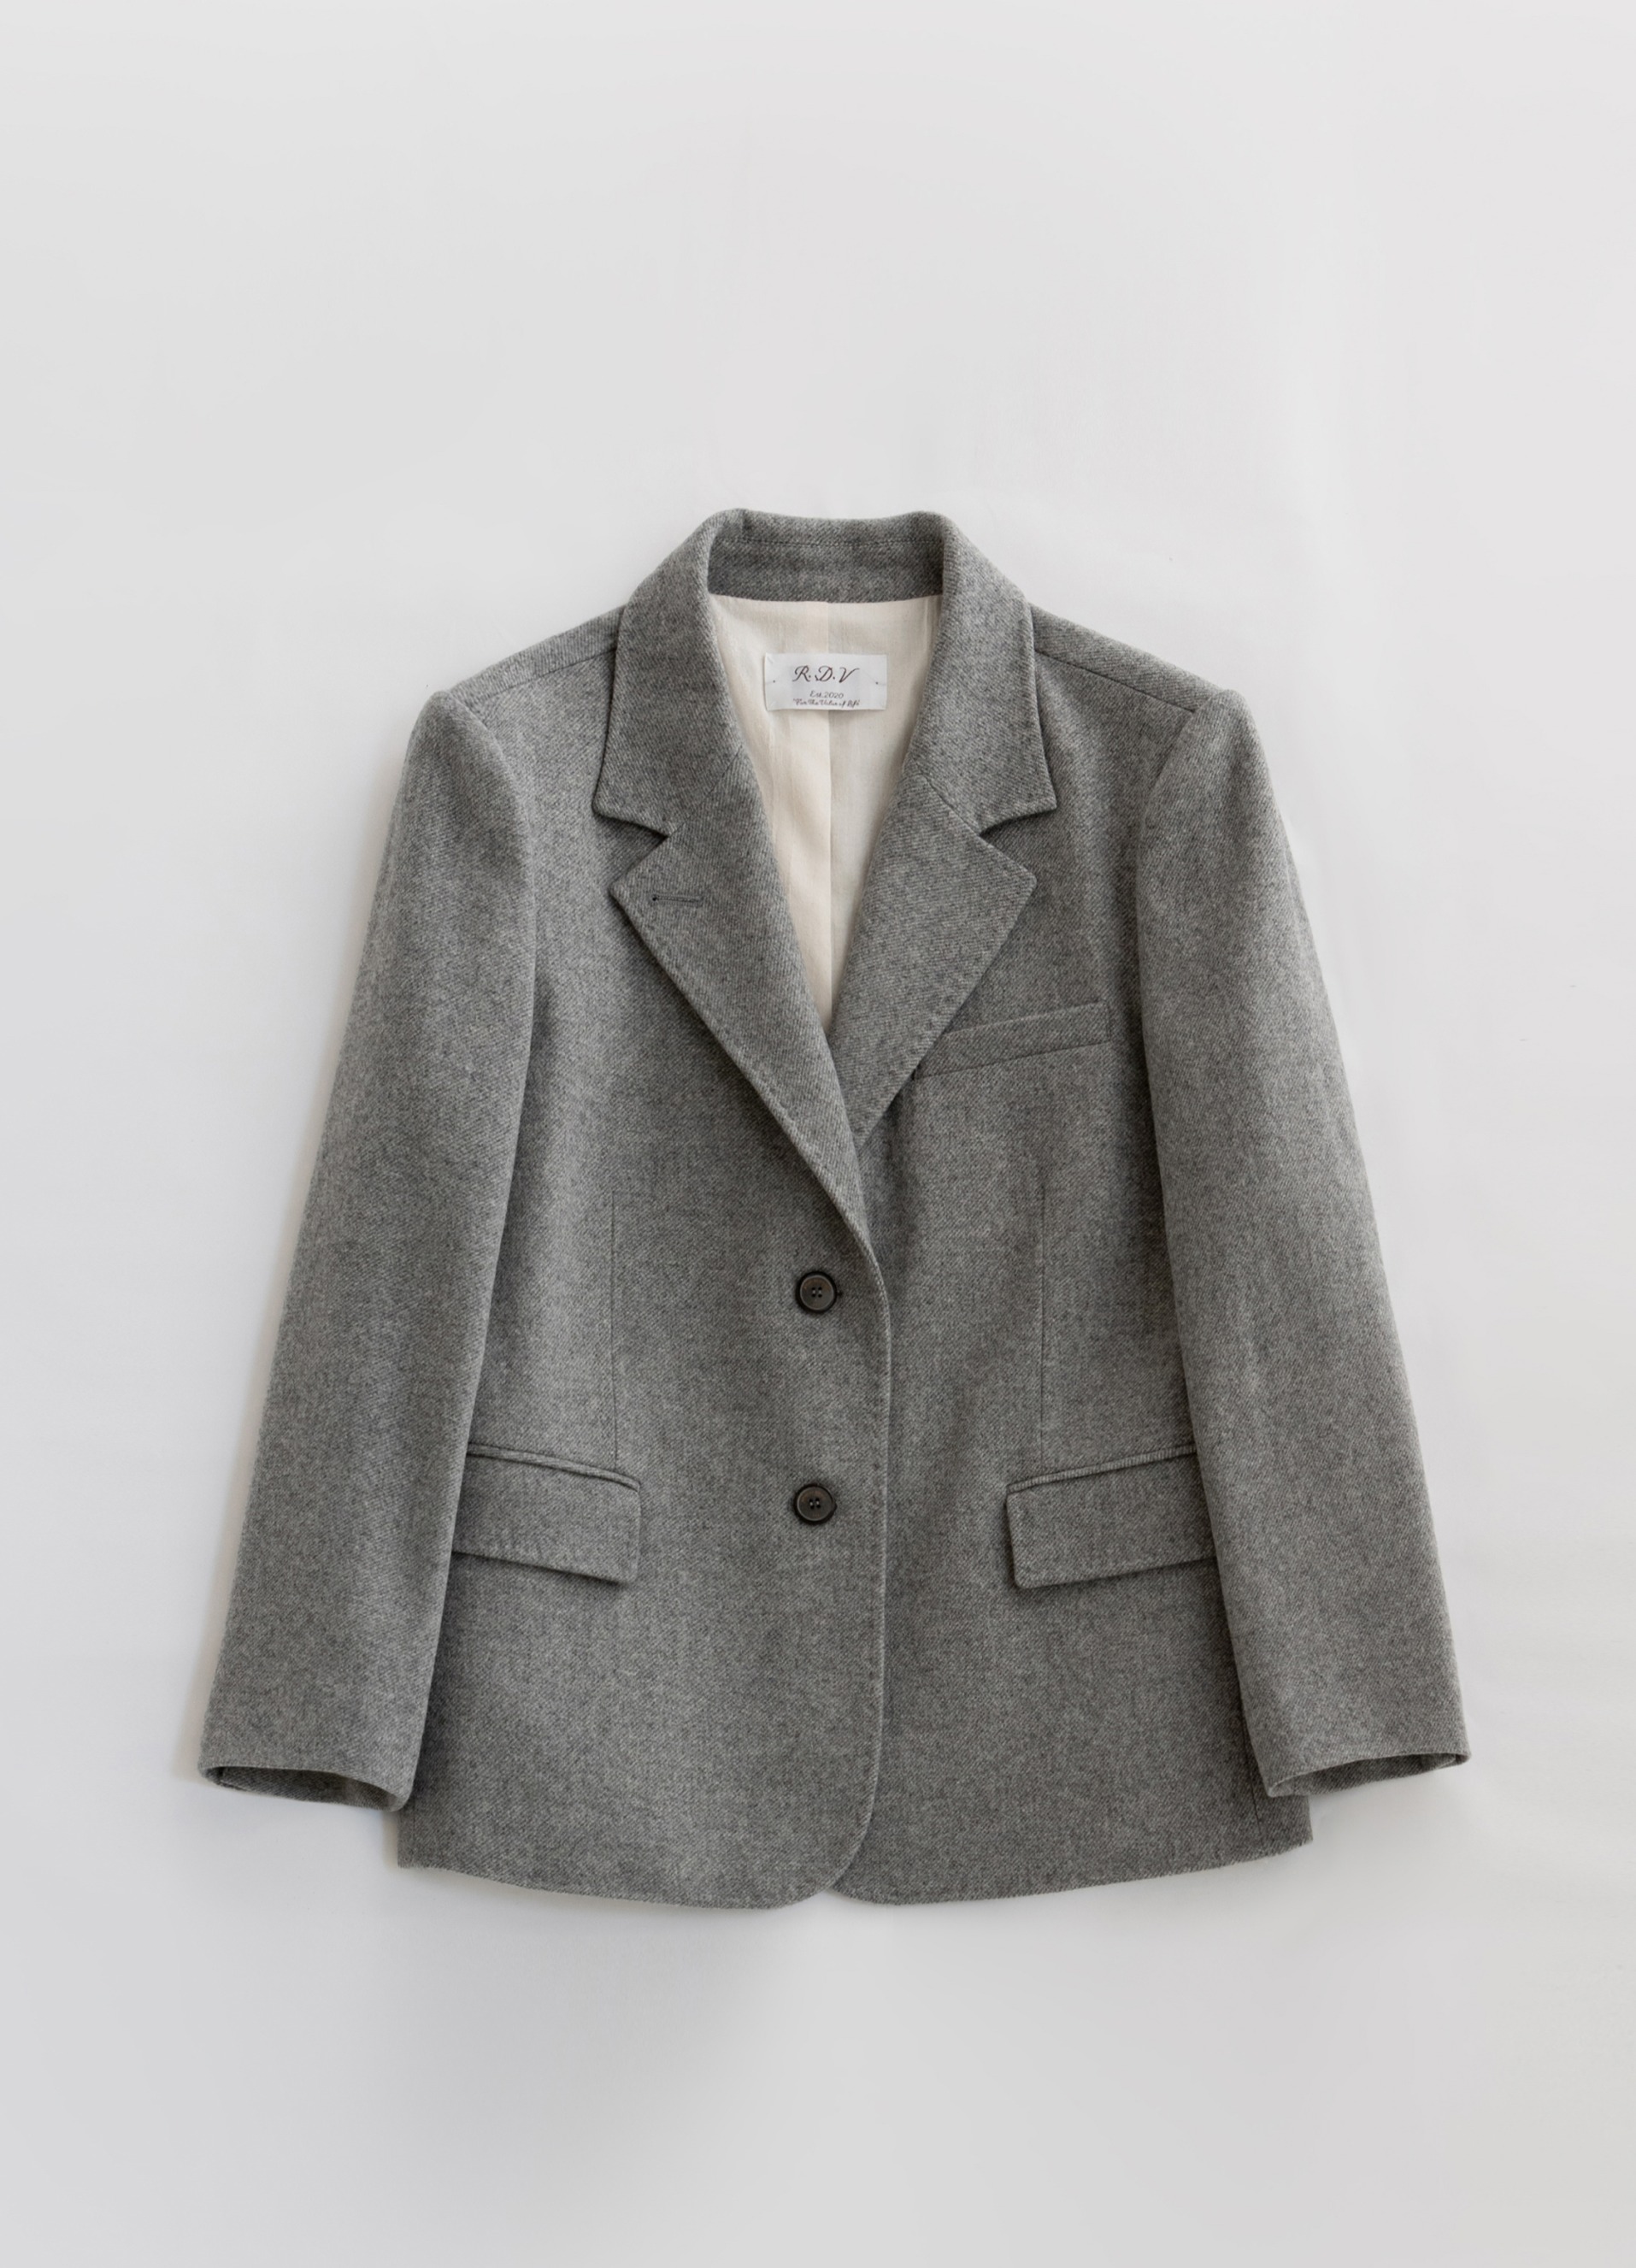 Sloane Jacket (Gray) Out Of Stock